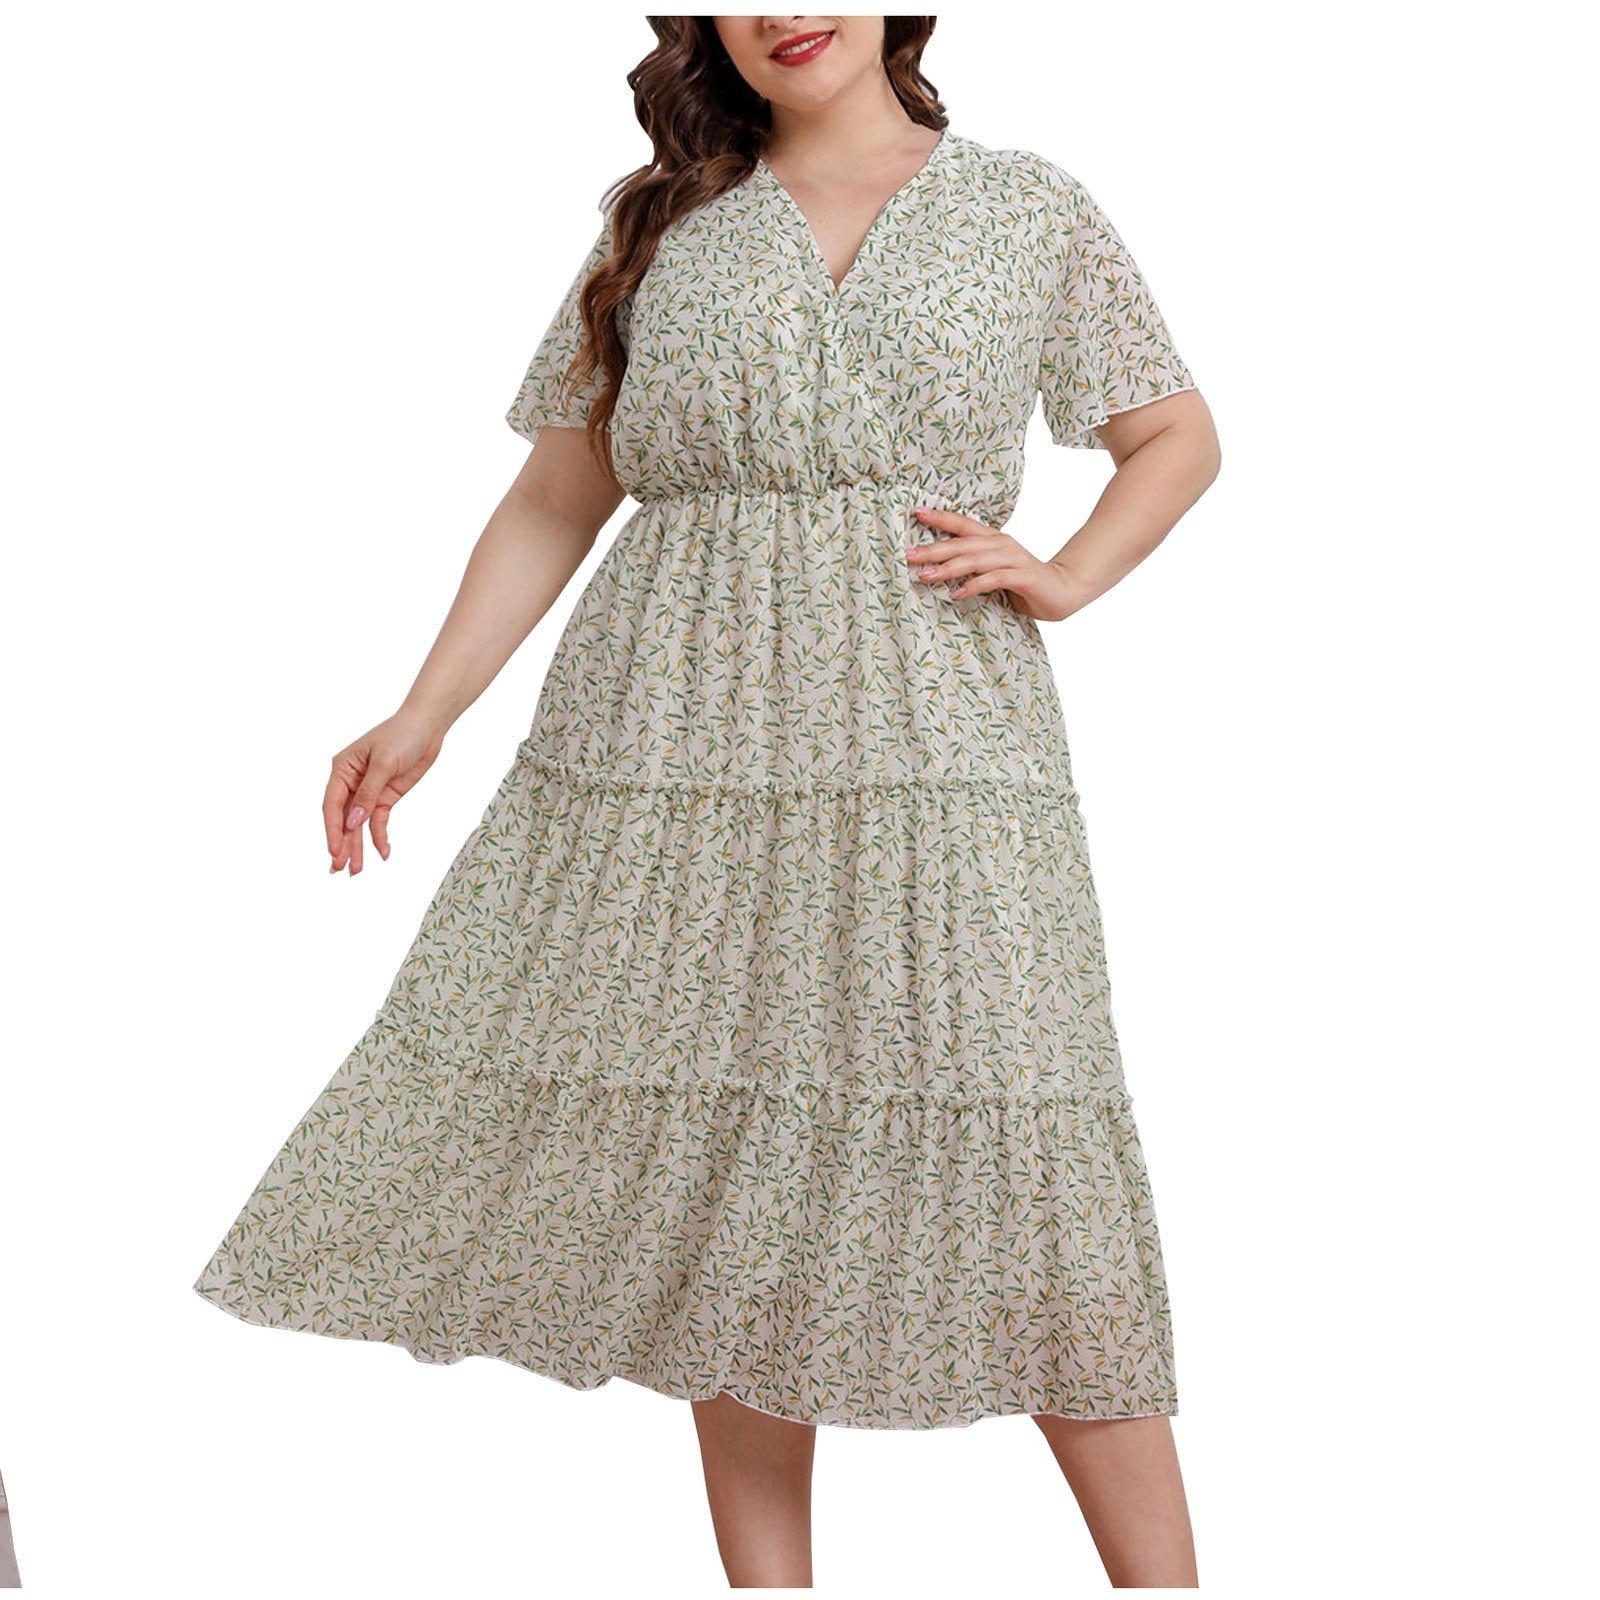 Details about   Petite Womens Floral Polka-dot Cap Sleeve Chiffon Layered Dress Size 10 12 14 